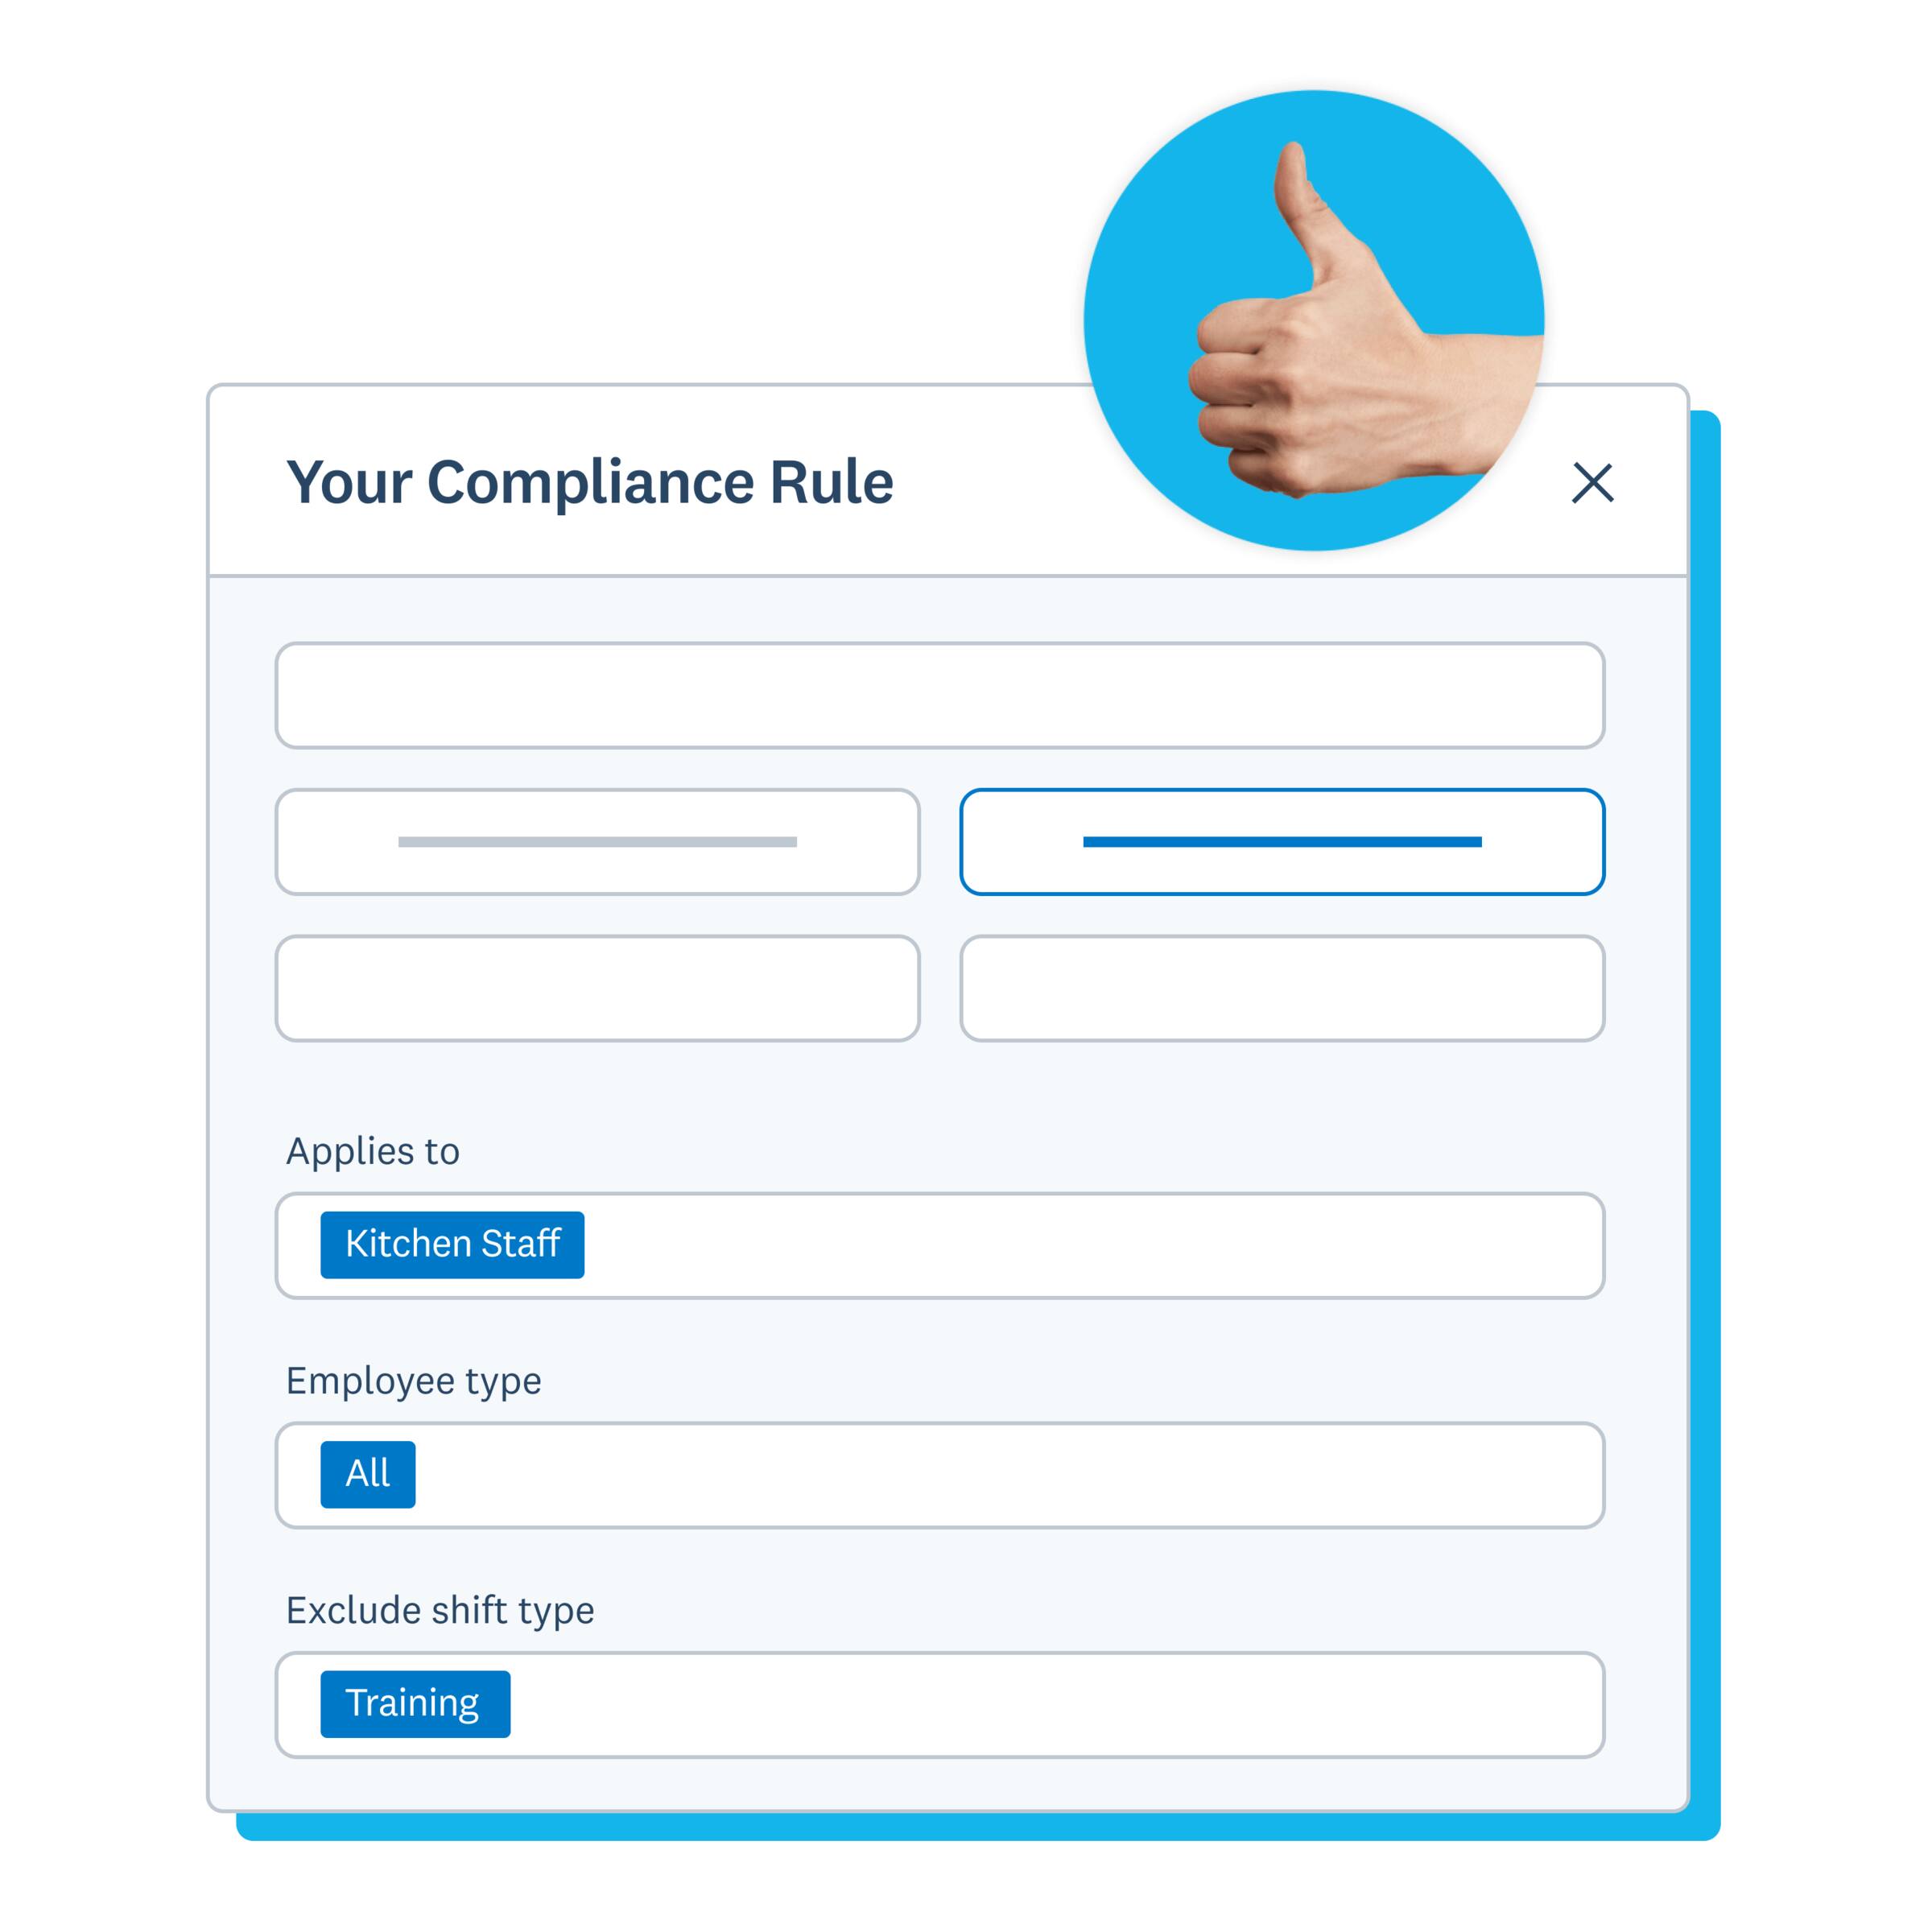 A thumbs up and a screen showing compliance rules that can be set up on workforce planning app Planday